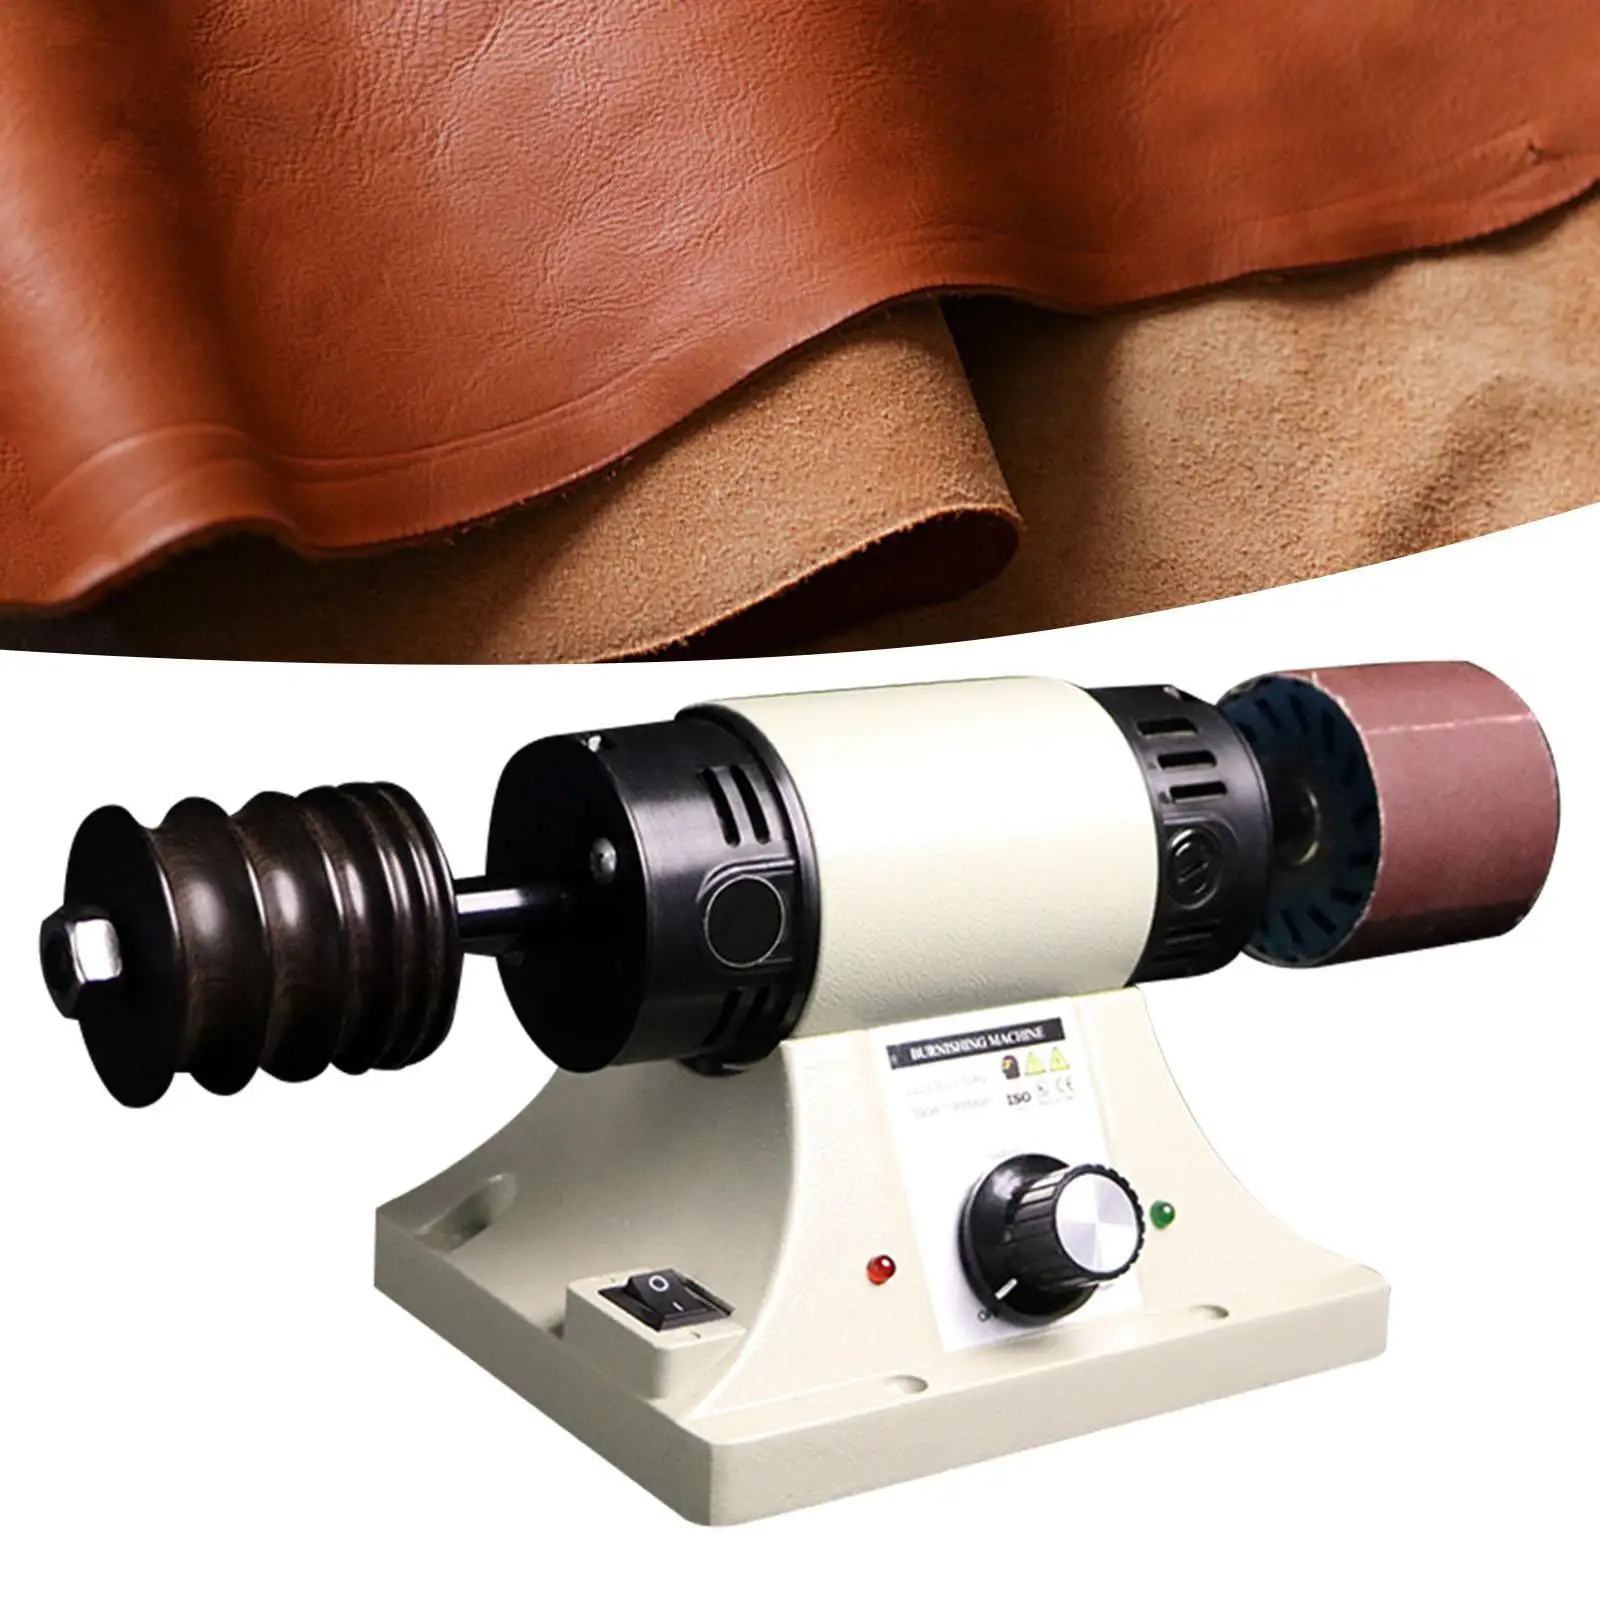 

Leather Polishing Burnishing Machine Compact Professional Easy to Carry Side Polisher for Bags Shoes Wallet Boots Leather Craft